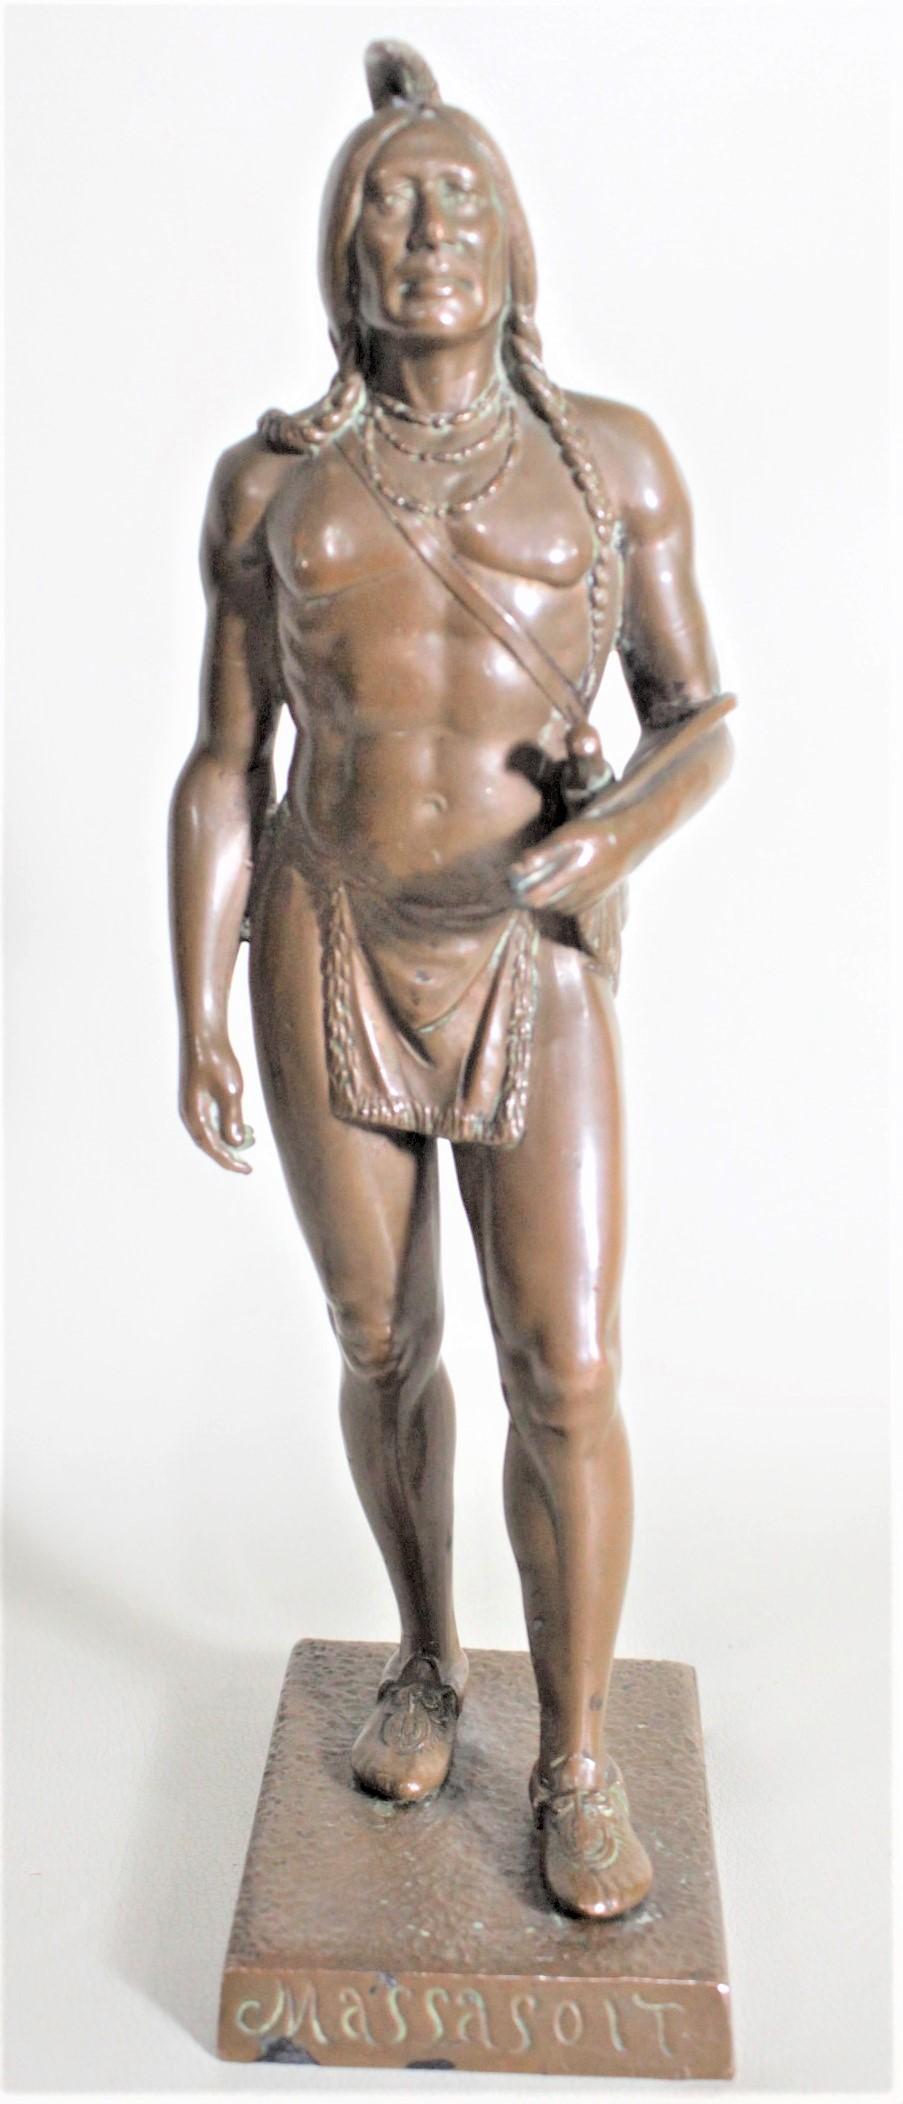 This very detailed bronze sculpture was done by Cyrus Dallin of the United States in approximately 1900 in a classical American style. This quite well executed sculpture depicts the Indigenous Wampanoag Chief 'Massasoit' who in known is some